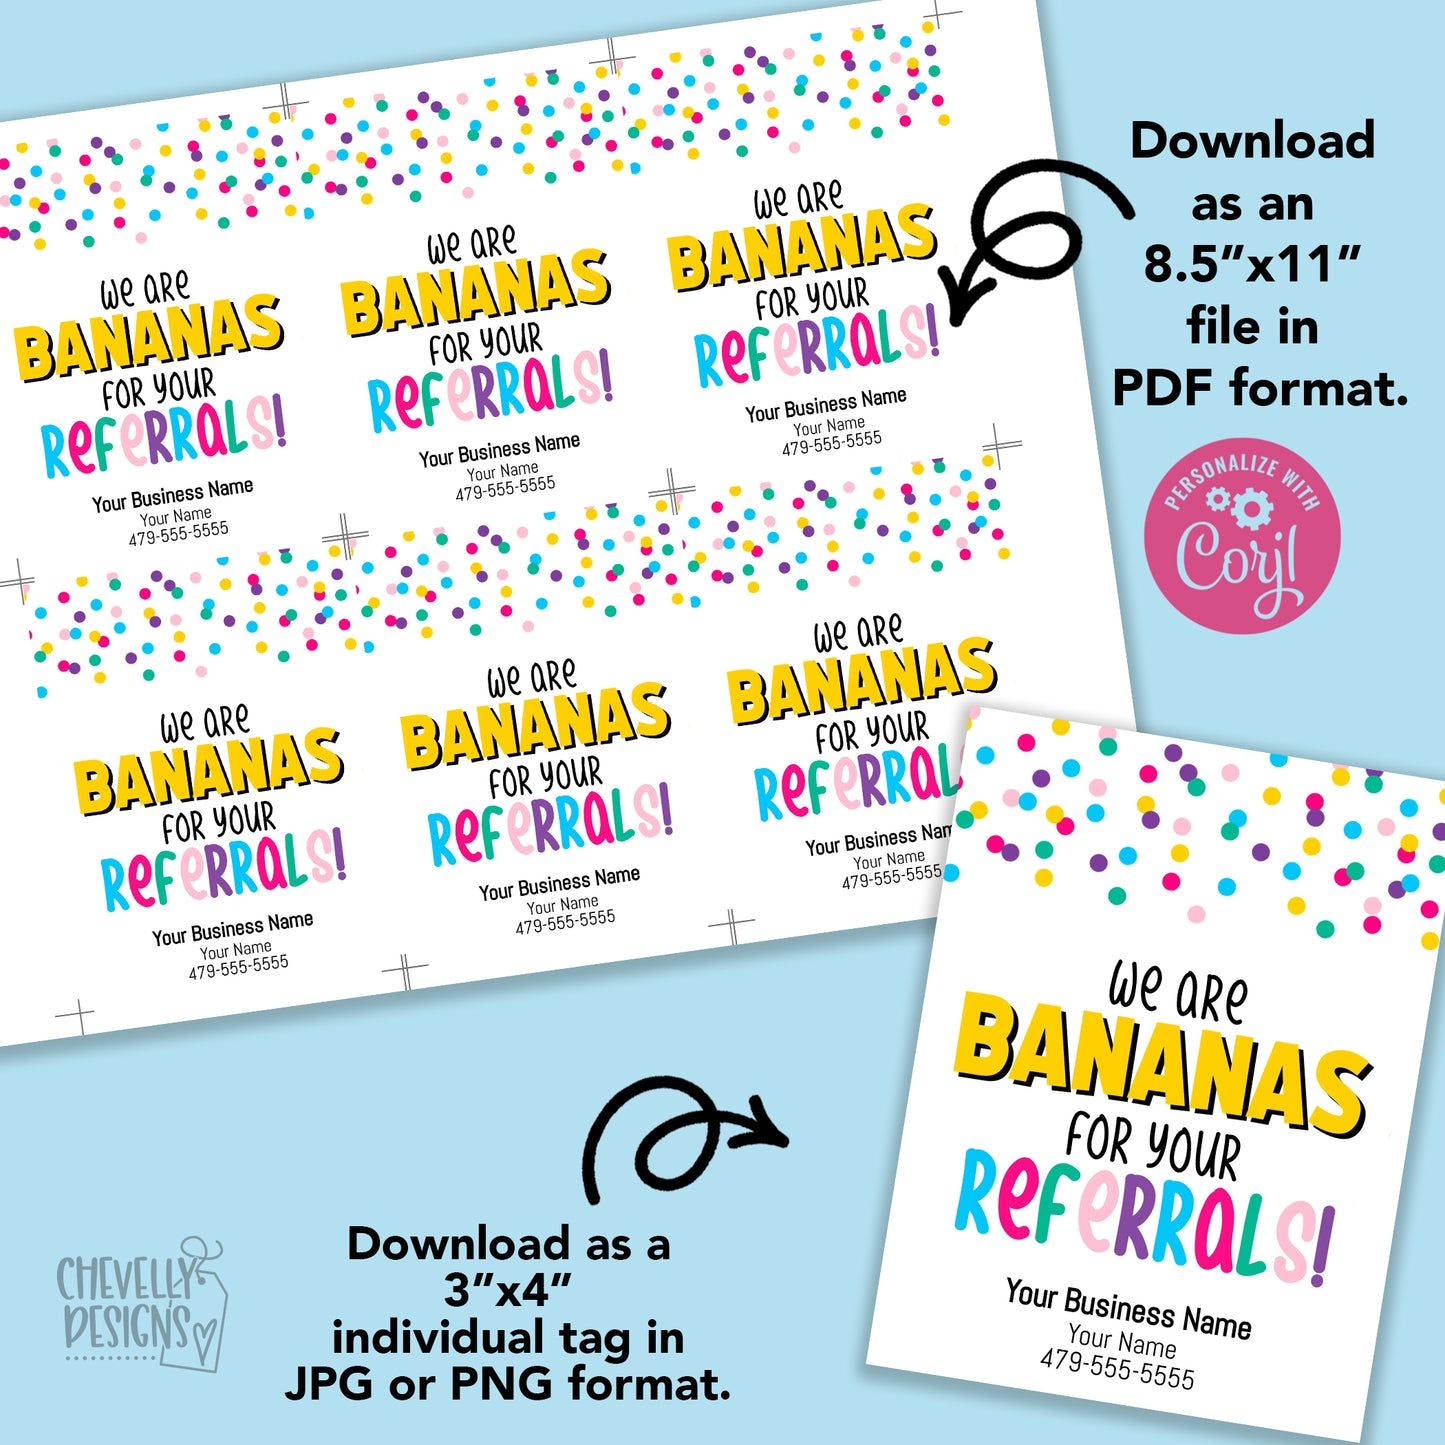 Editable - We Are Bananas for Your Referrals - Gift Tags for Business Marketing - Printable - Digital File